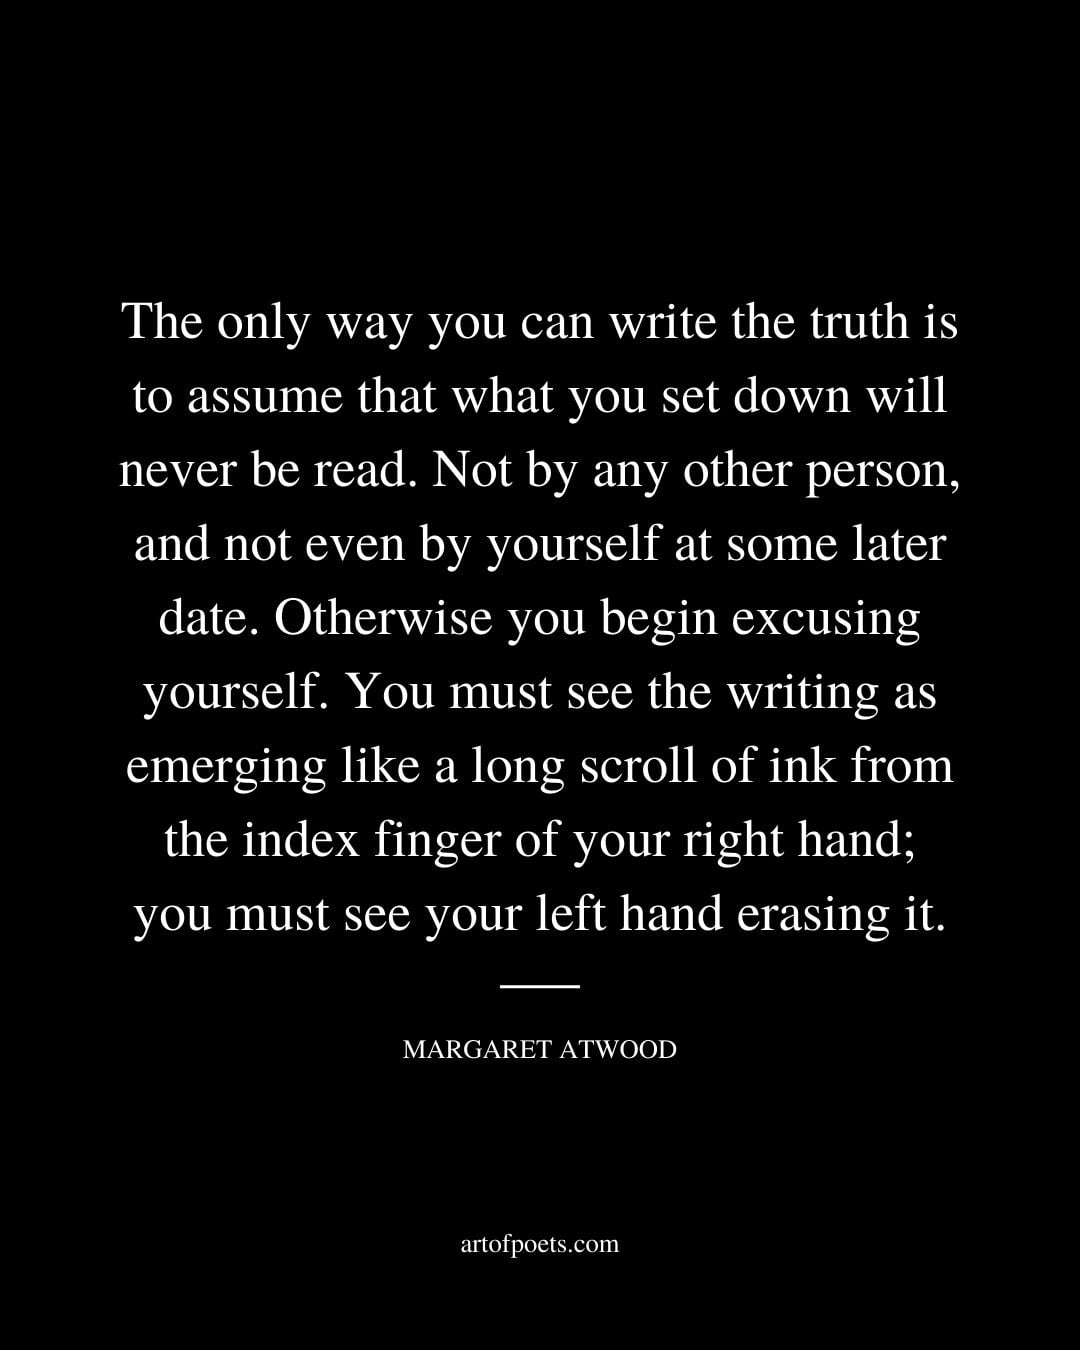 The only way you can write the truth is to assume that what you set down will never be read